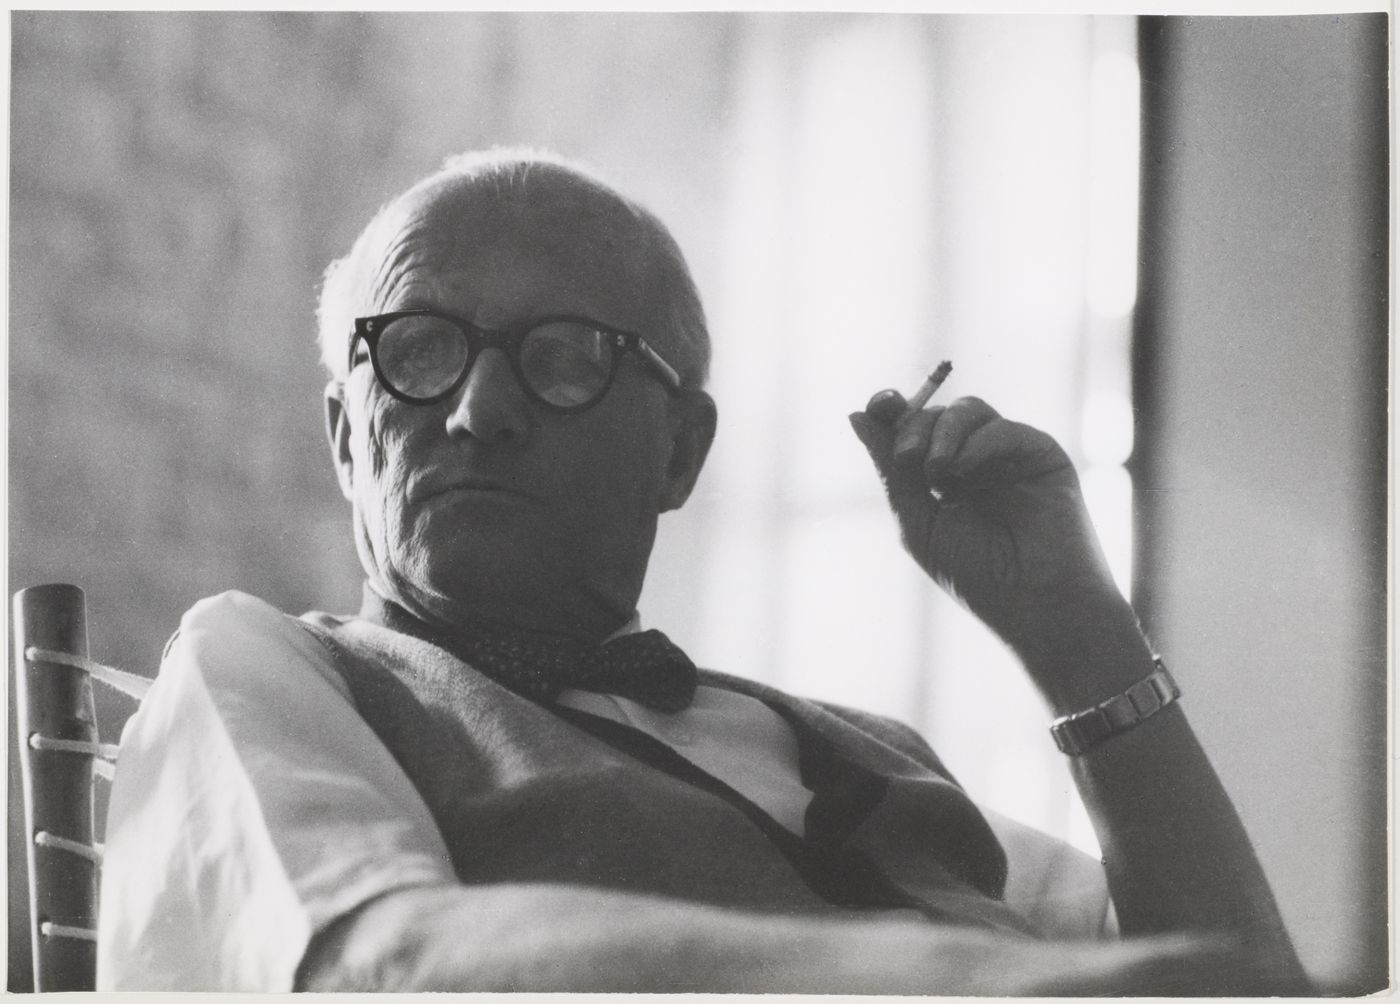 Photograph of Pierre Jeanneret at Chandigarh, India